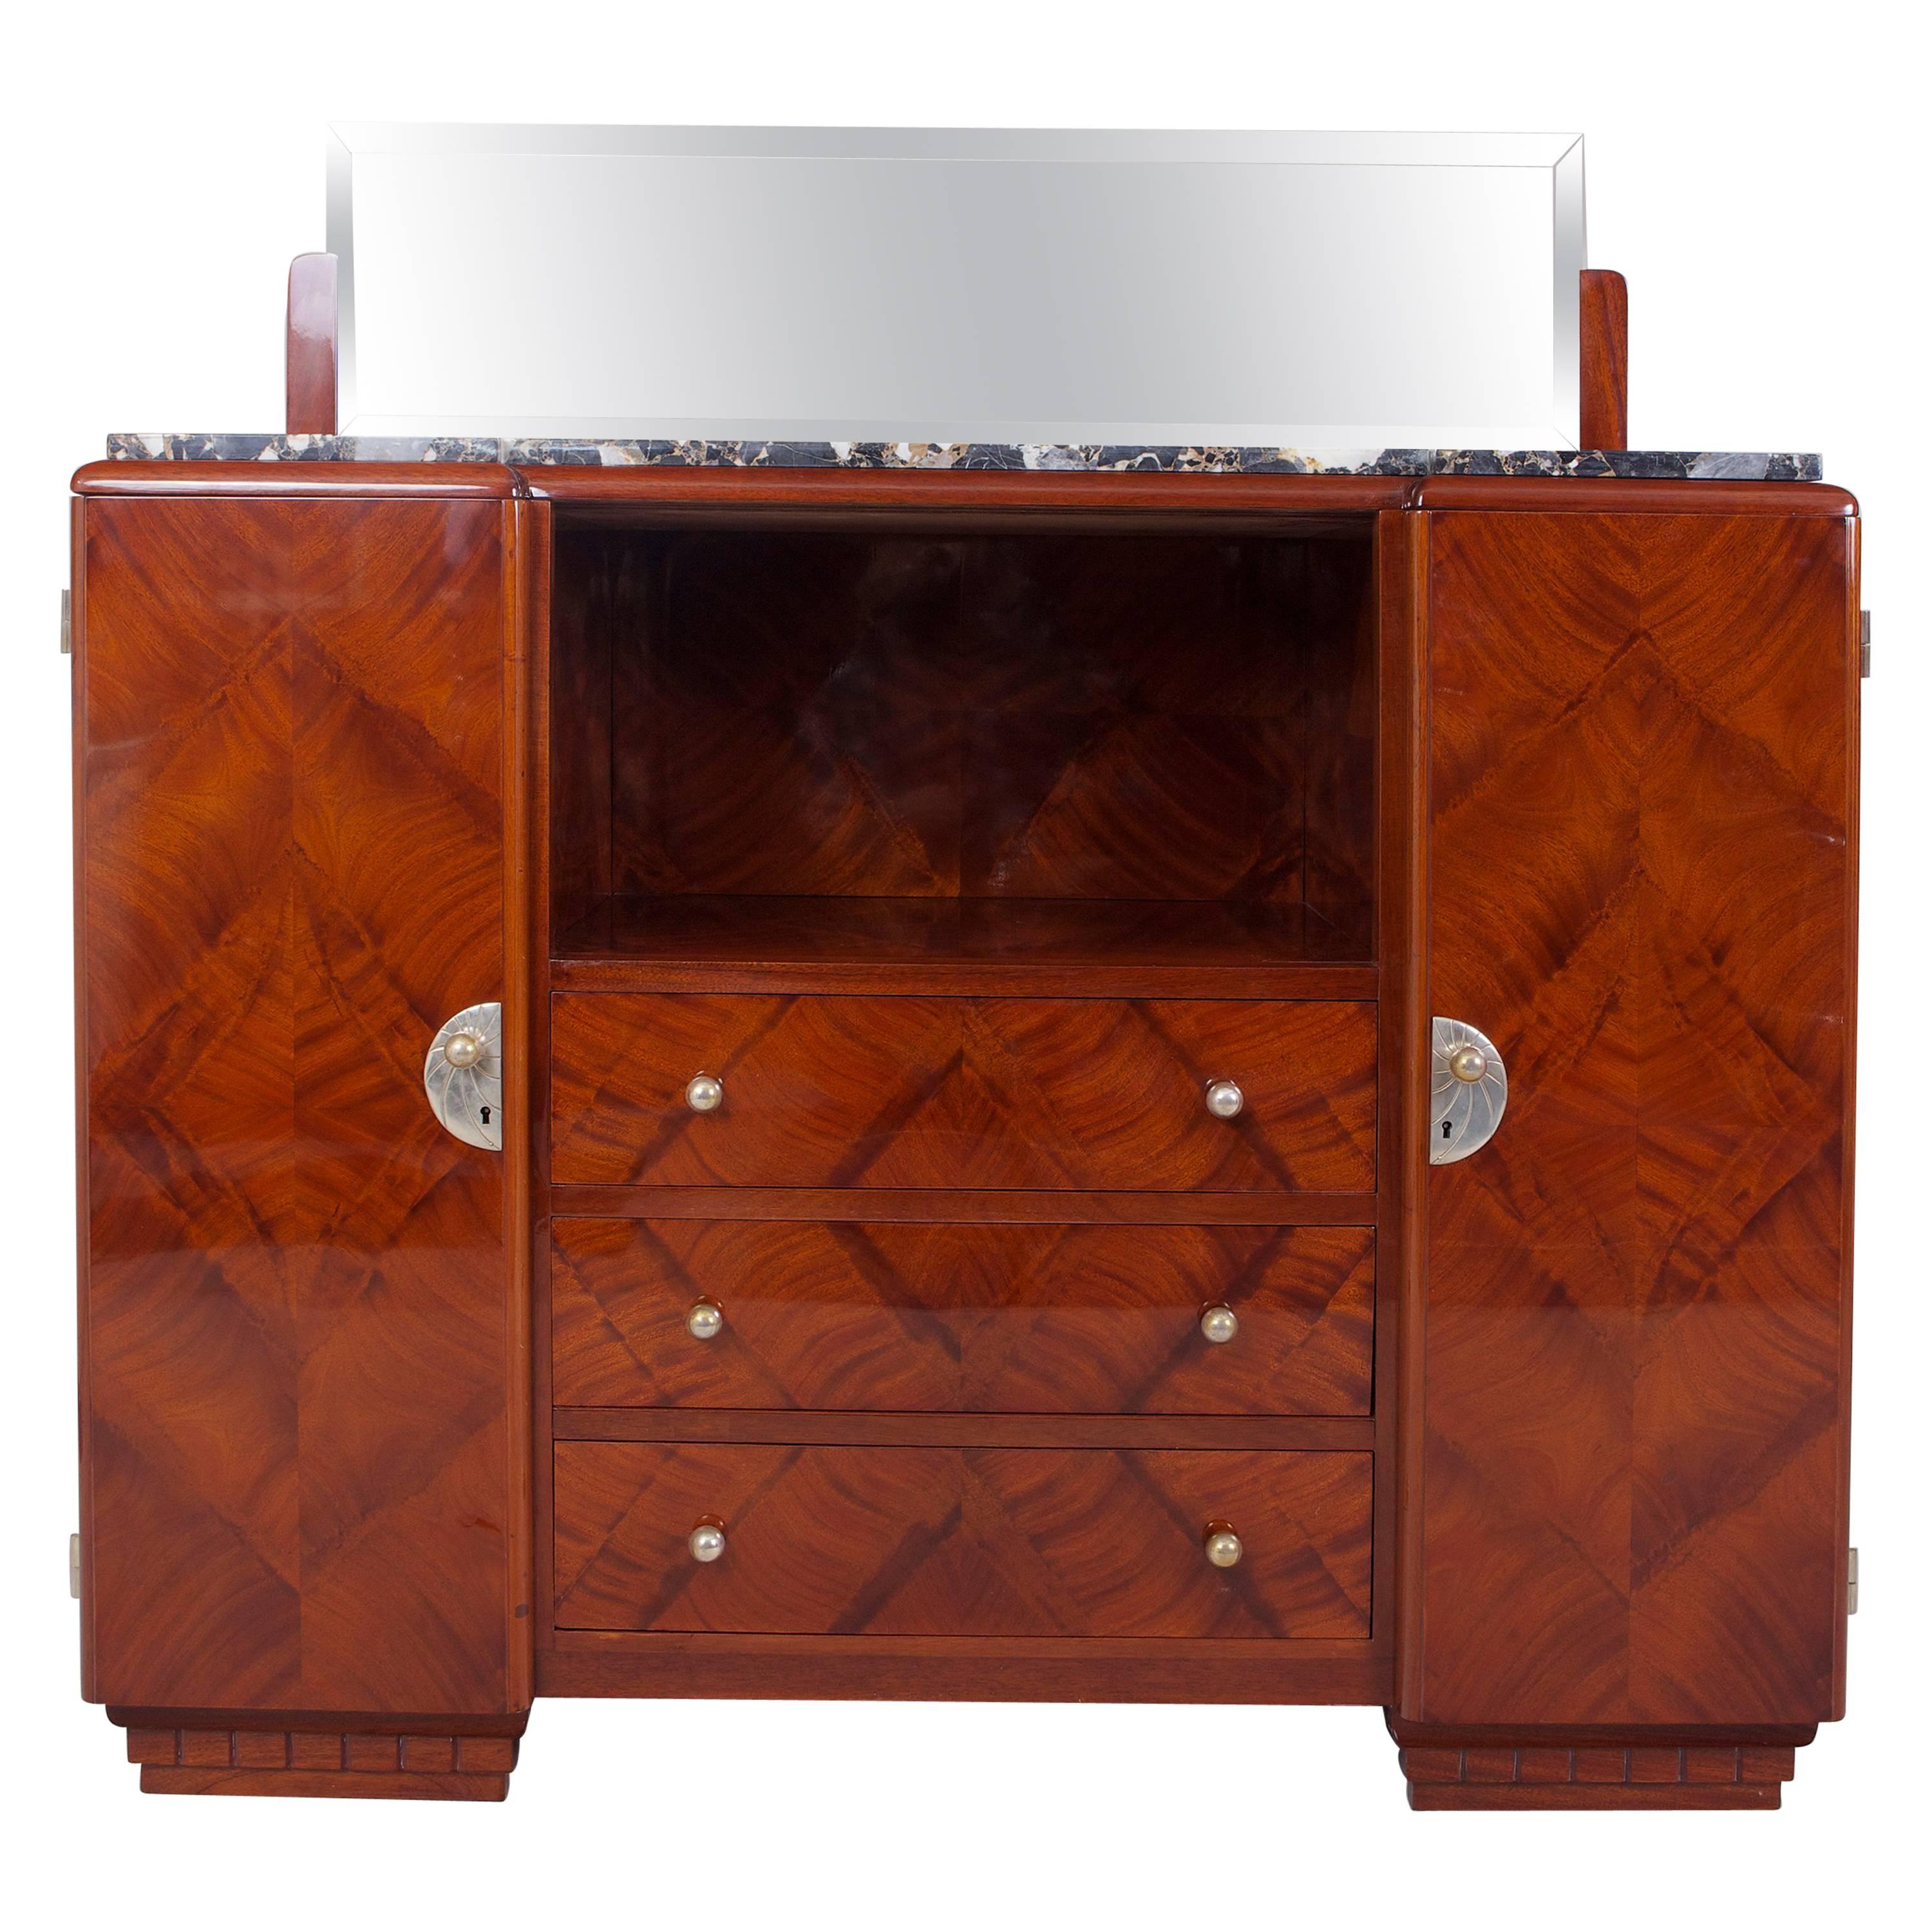 Mahogany Art Deco French Sideboard with Marble Desk and Mirror - 1920-1929